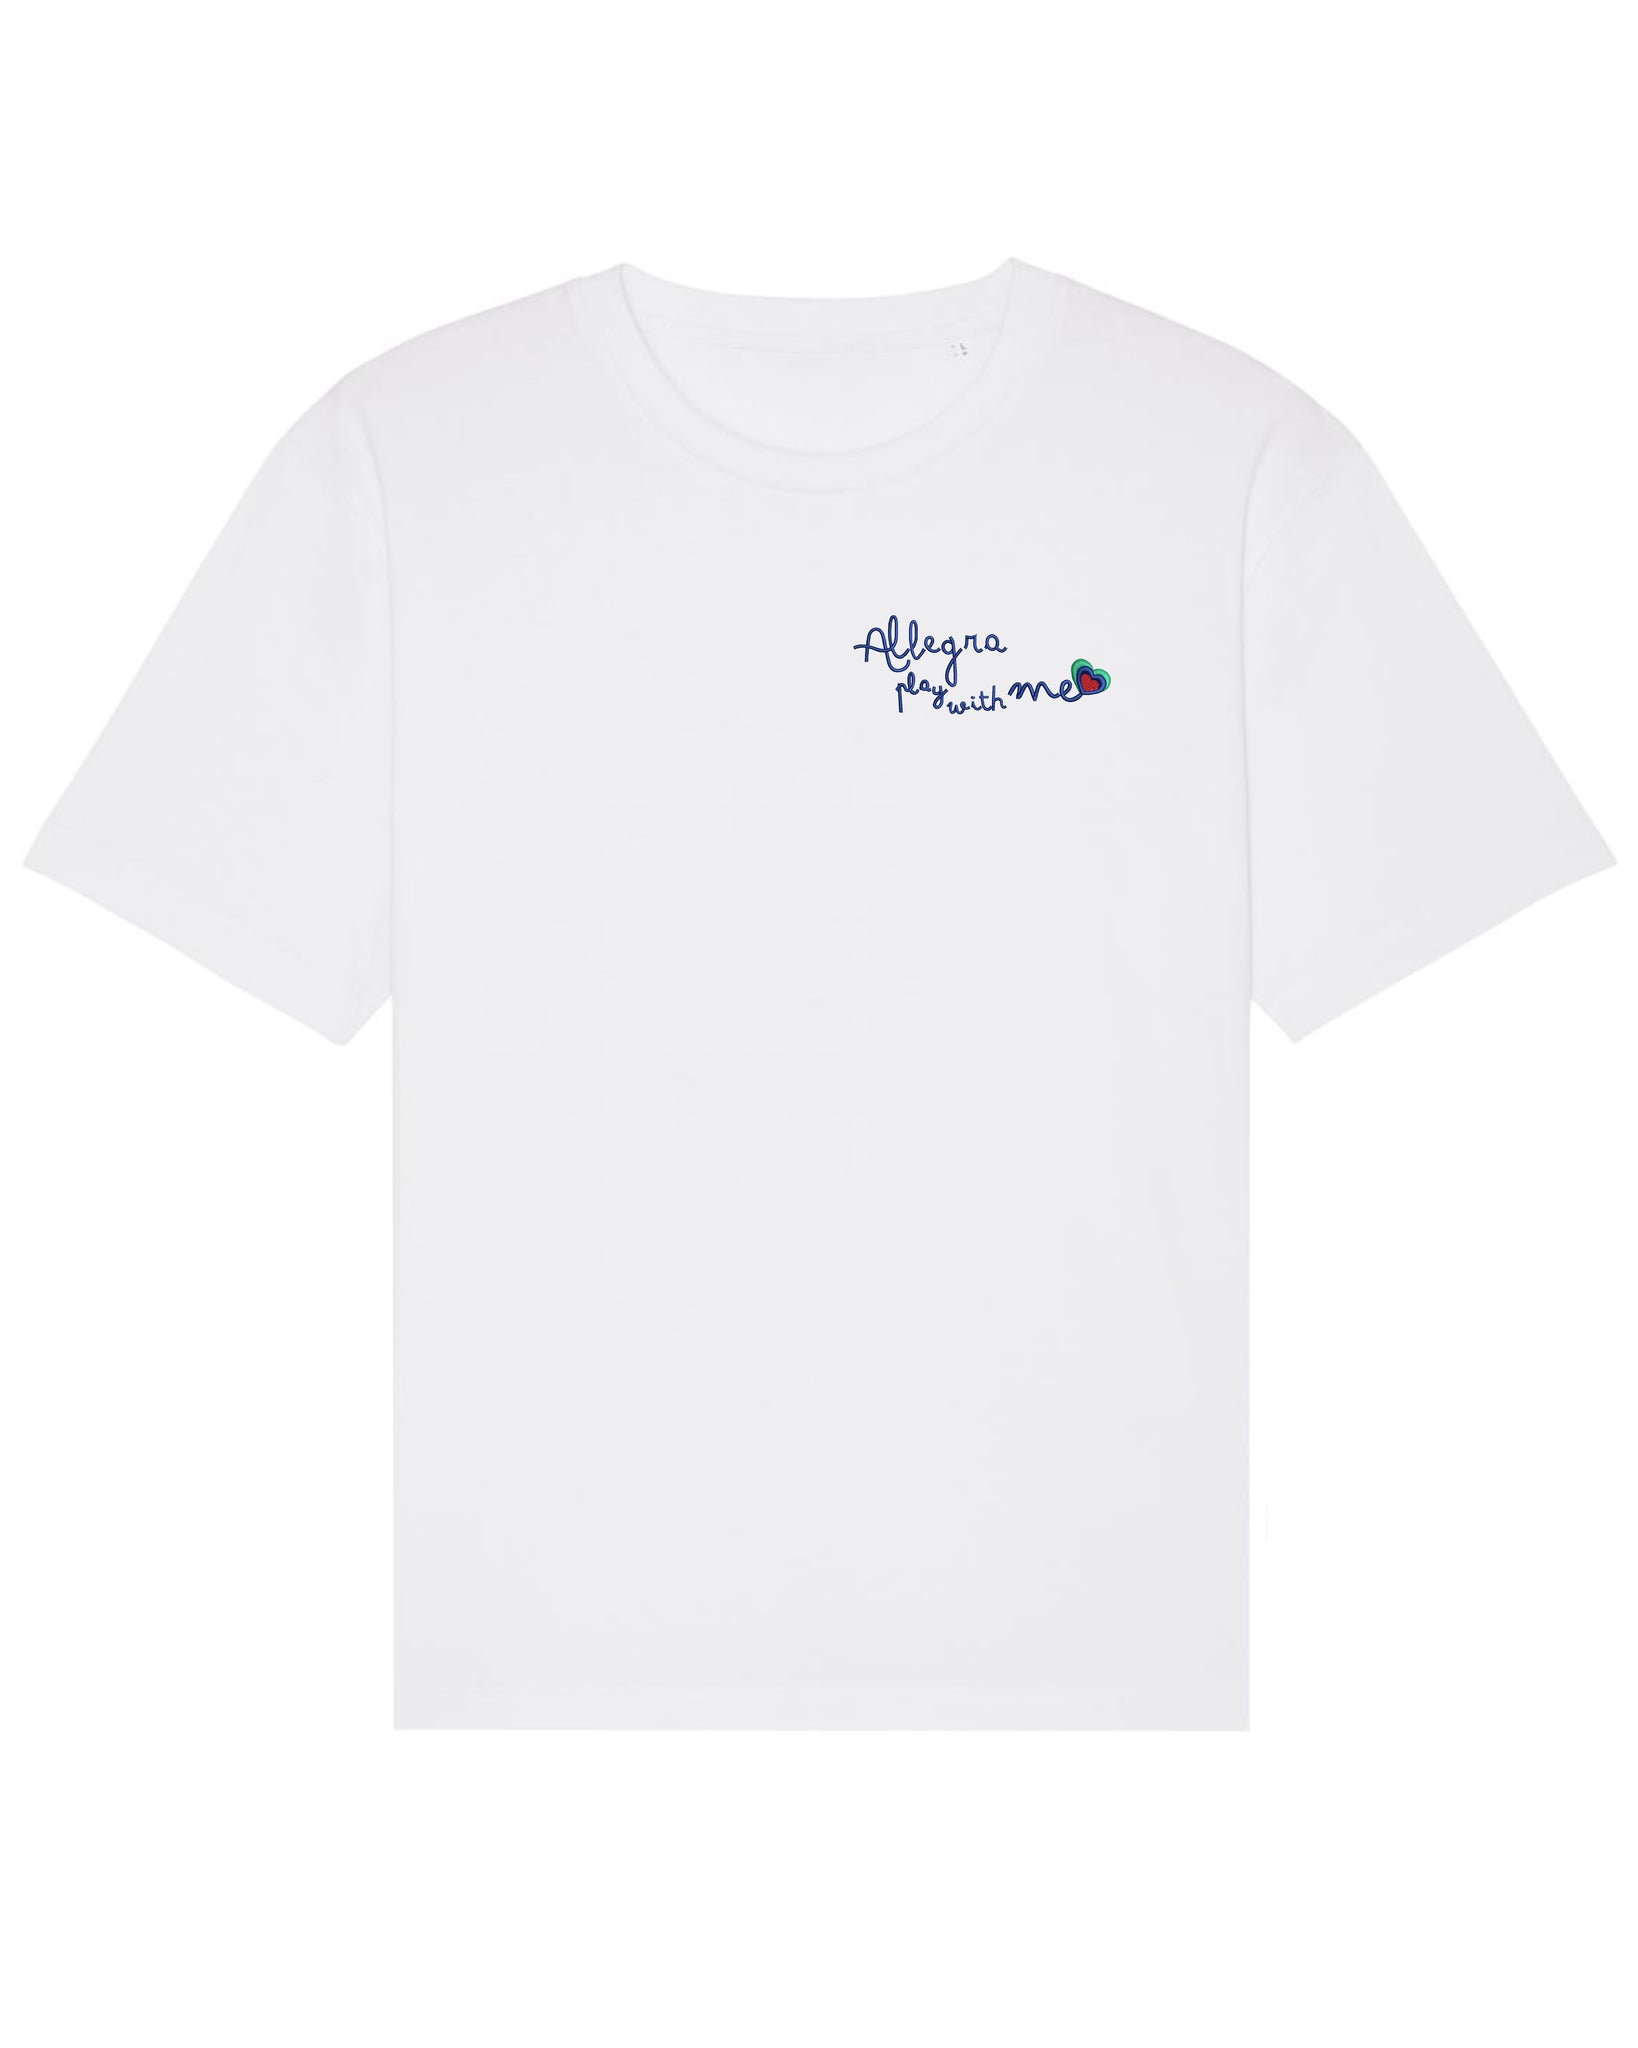 Allegra Play With Me Embroidered T-Shirt